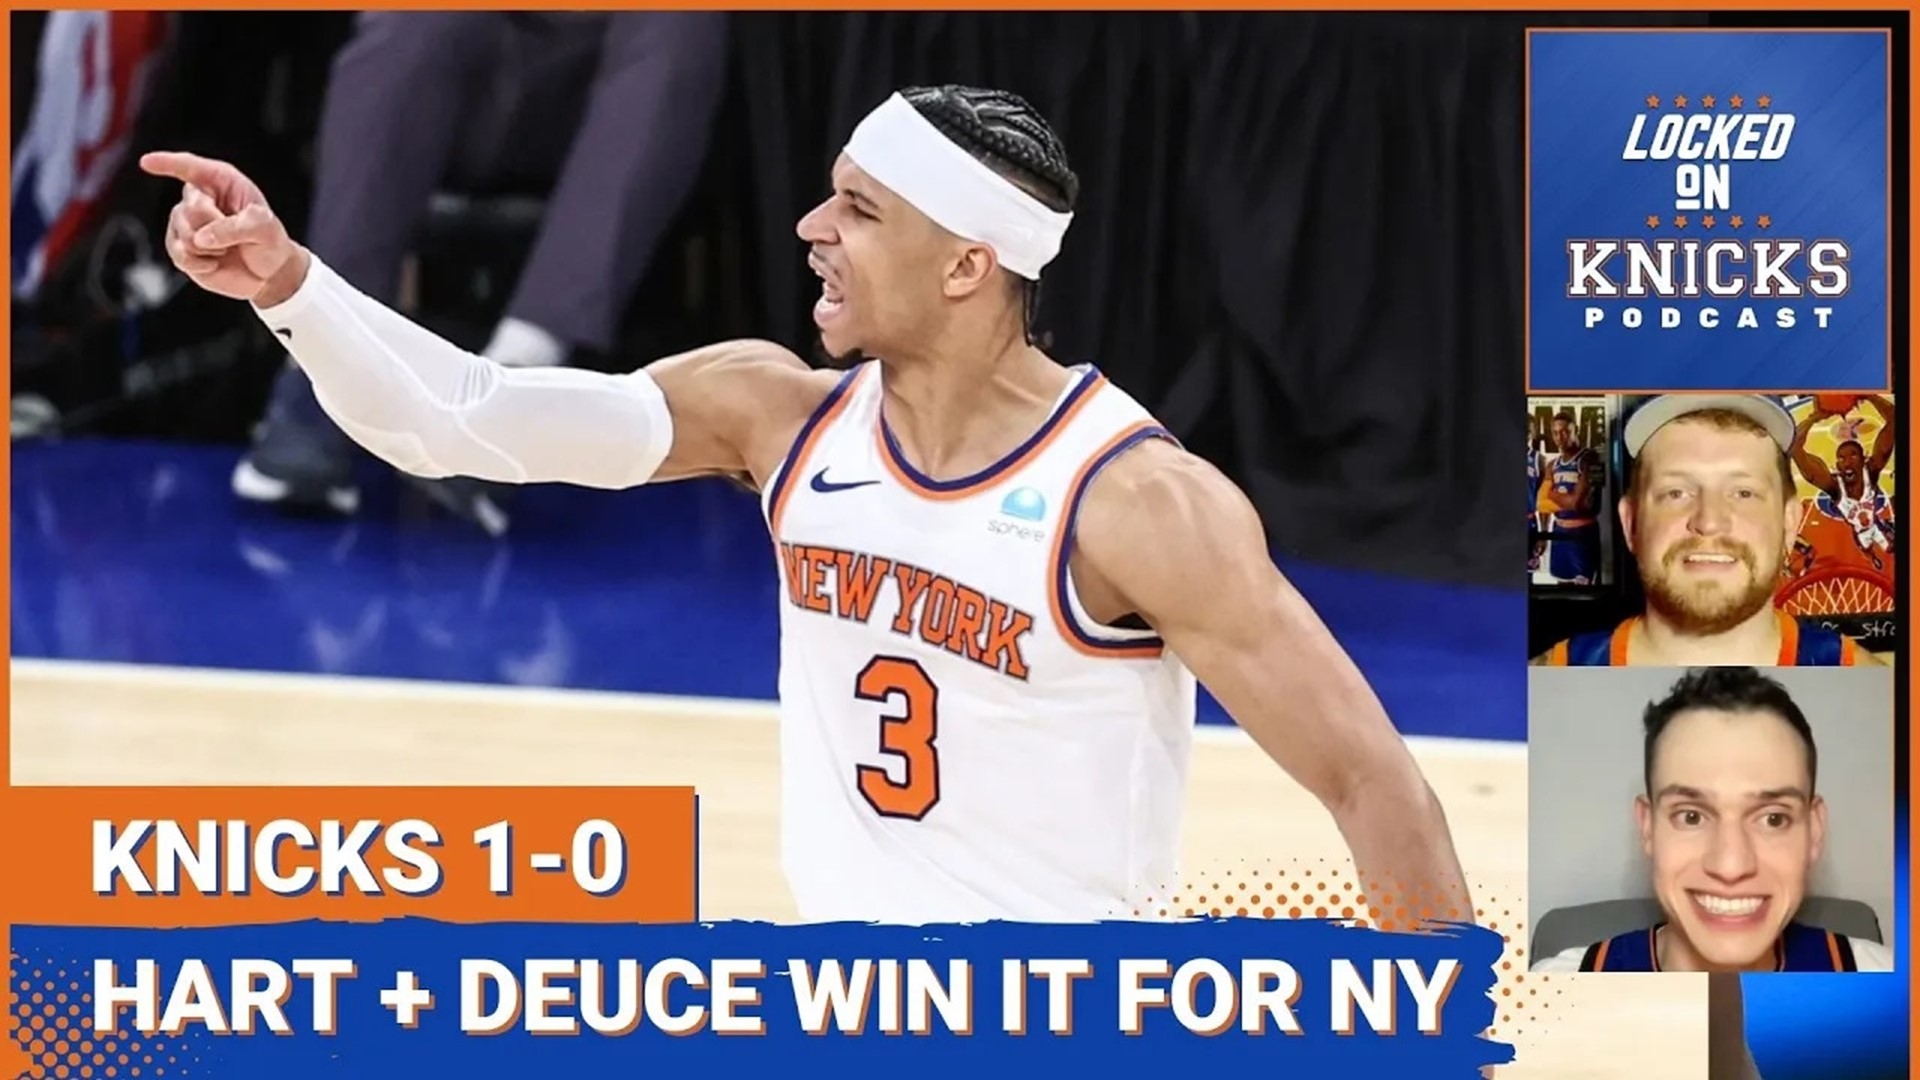 Alex and Gavin break down the Knicks' 111-104 win over the Sixers to take a 1-0 lead in their first round series.